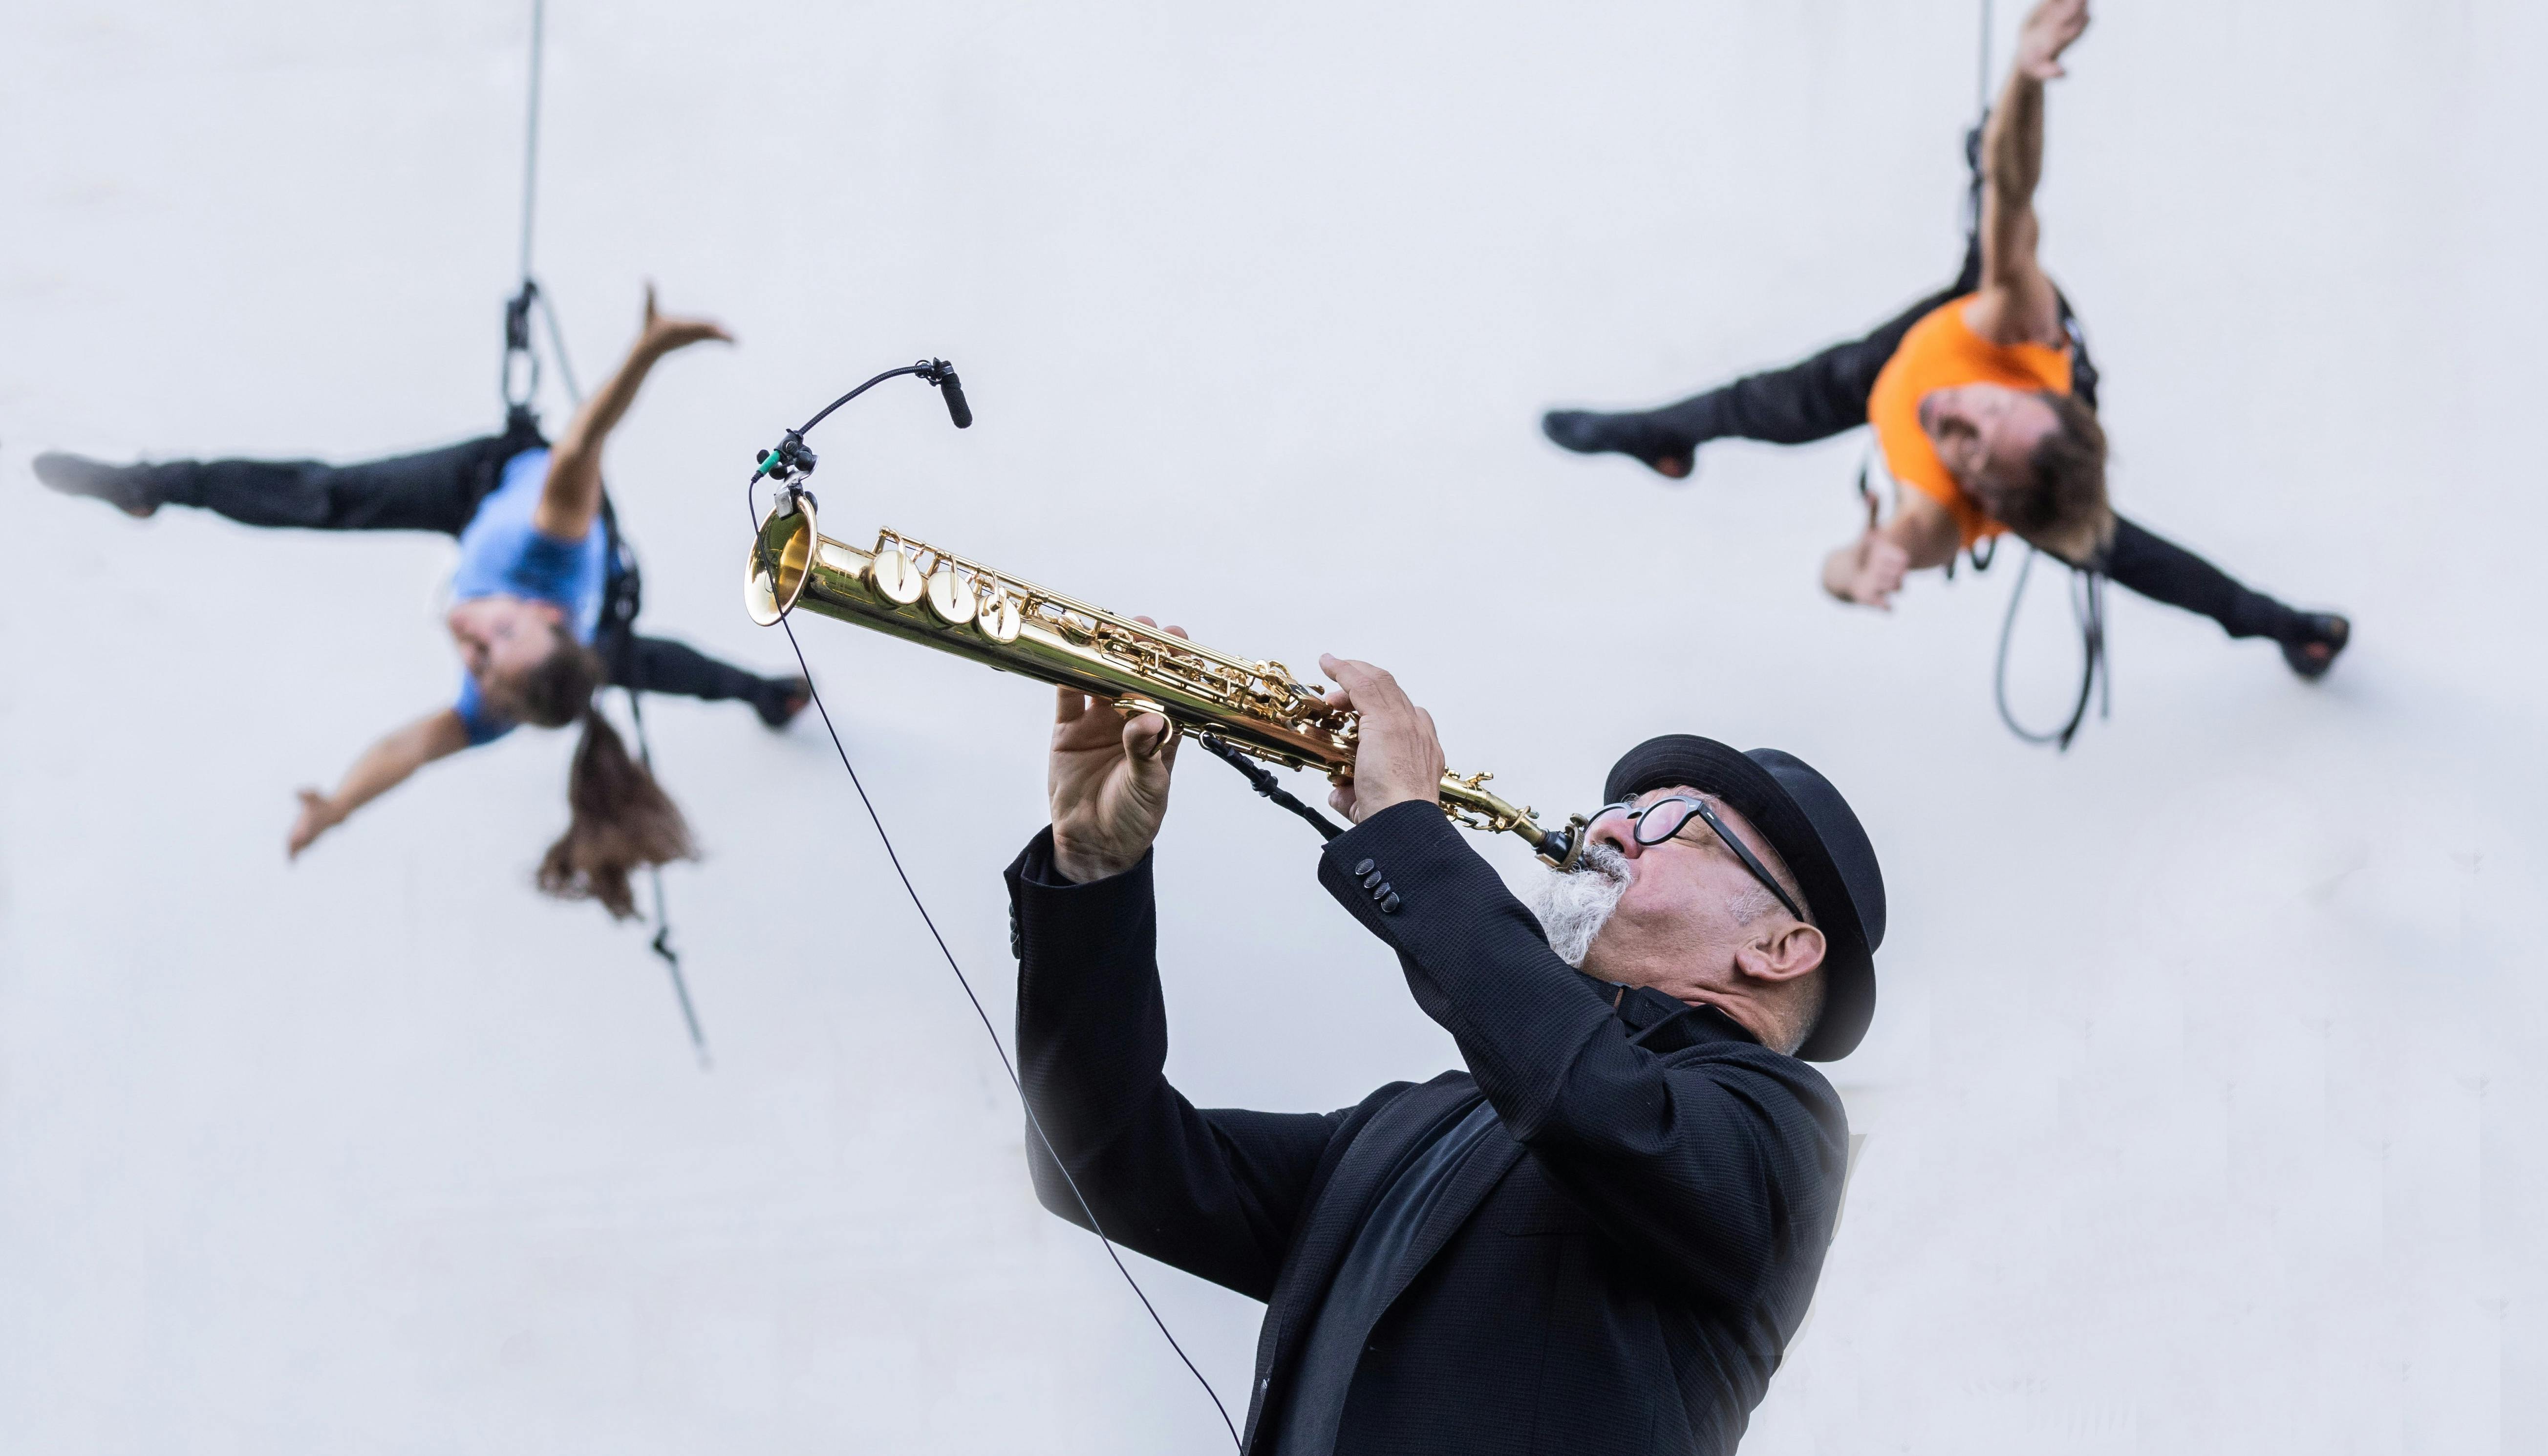 In the foreground a musician plays a trumpet. He is wearing a jacket, a bowler hat and black spectacles. In the background, two performers dance harnessed on a grey wall, a man in an orange T-shirt and a woman with long hair pulled back in a ponytail and a blue T-shirt.